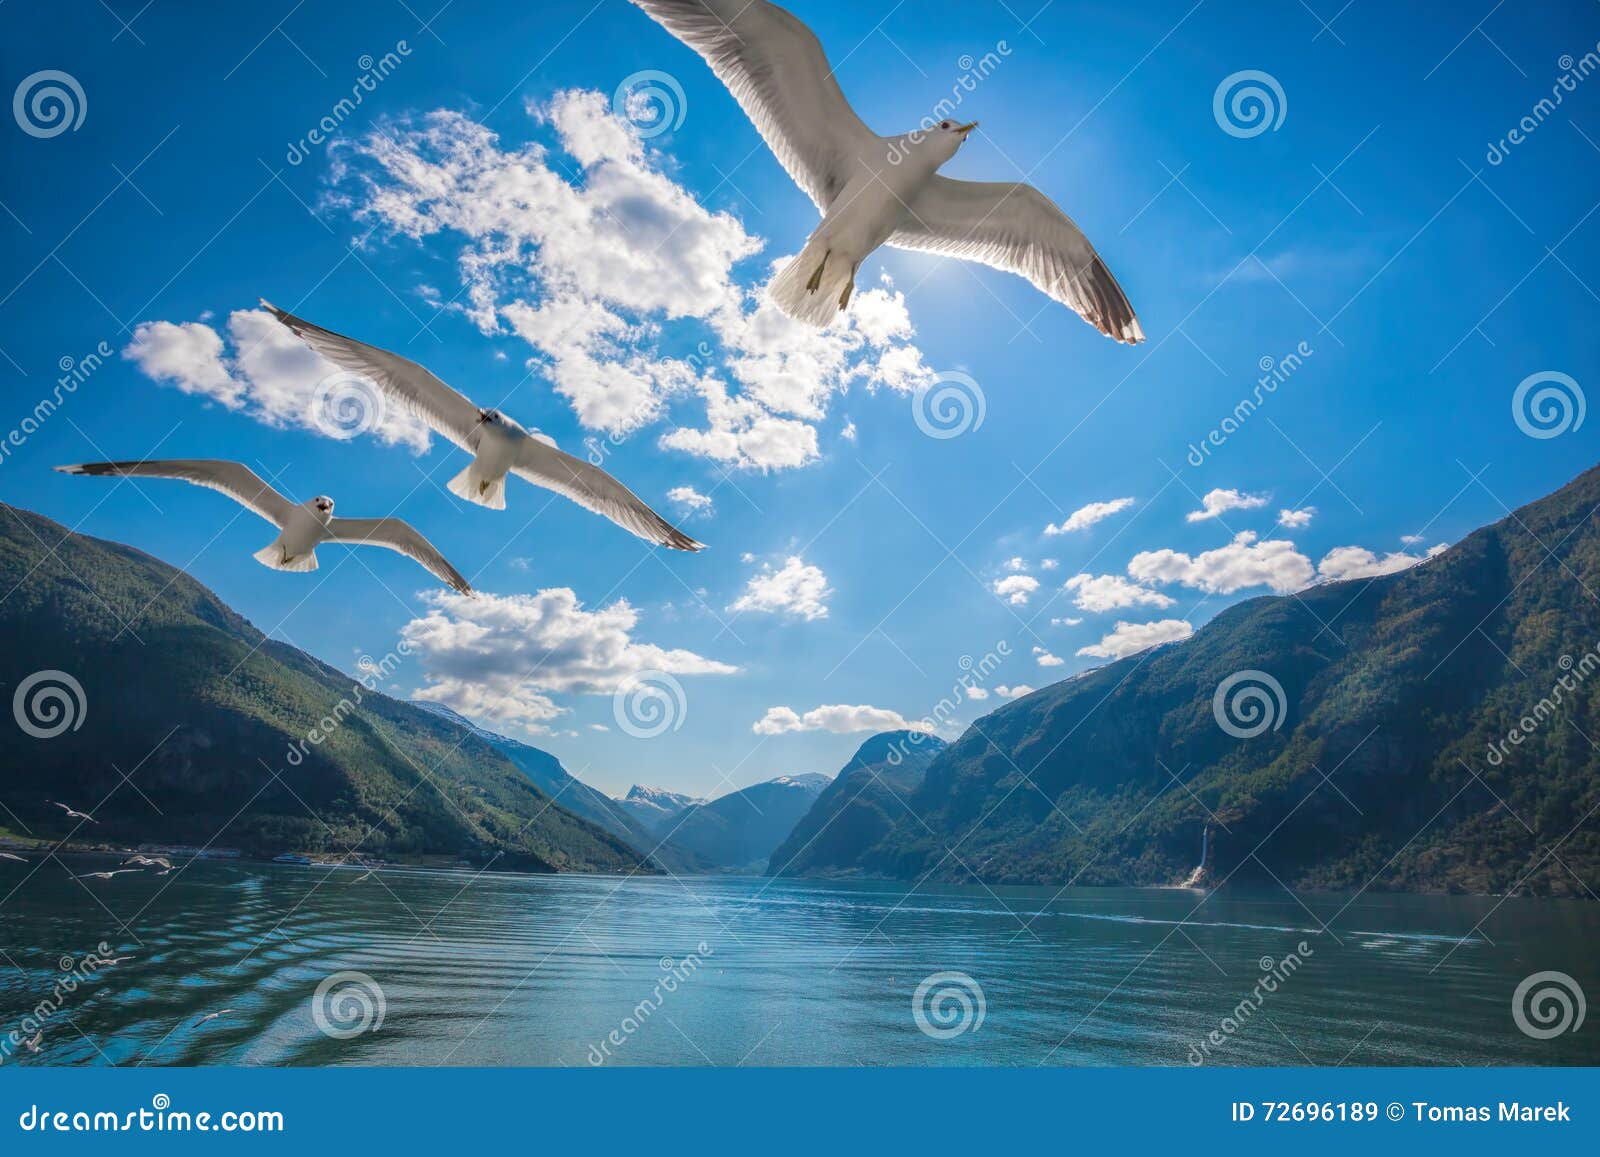 fjords with birds near the flam in norway